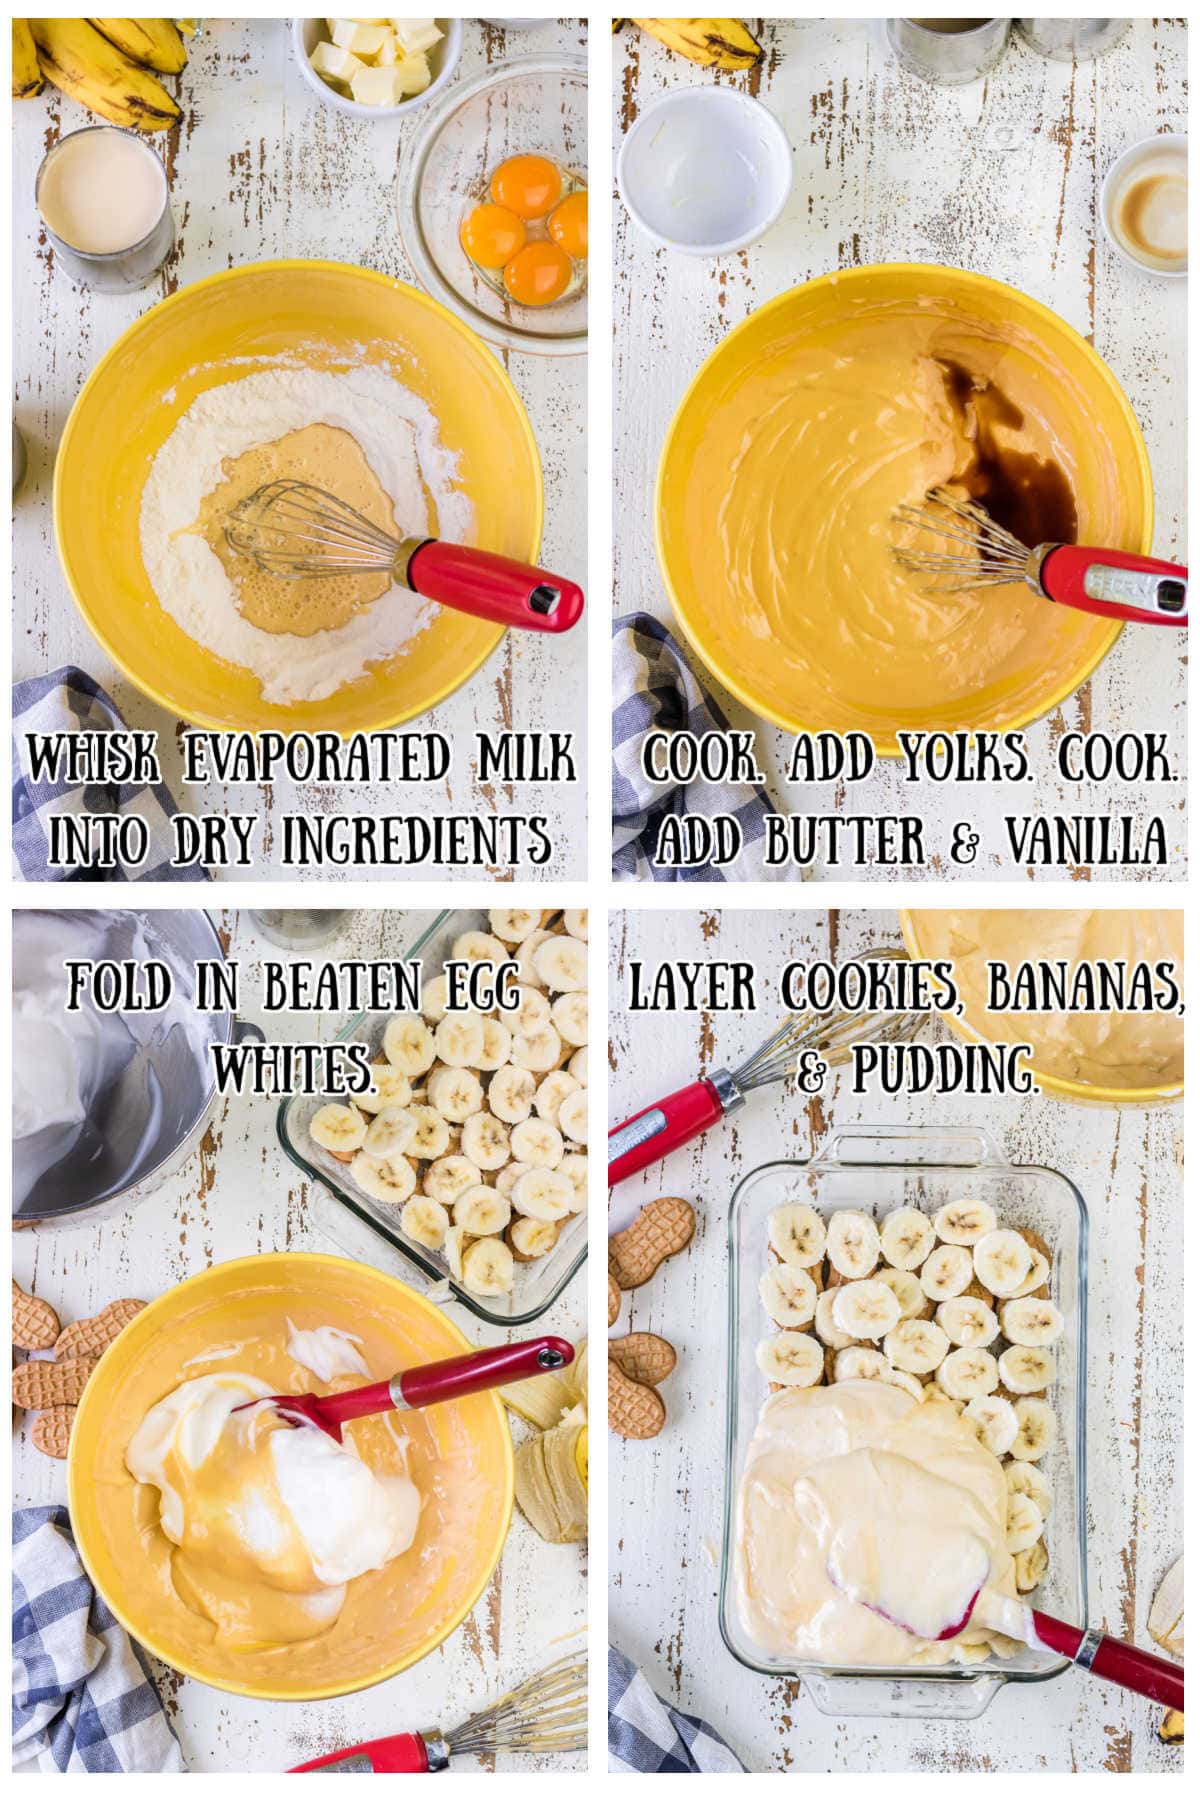 Step by step images showing how to make this easy banana pudding.